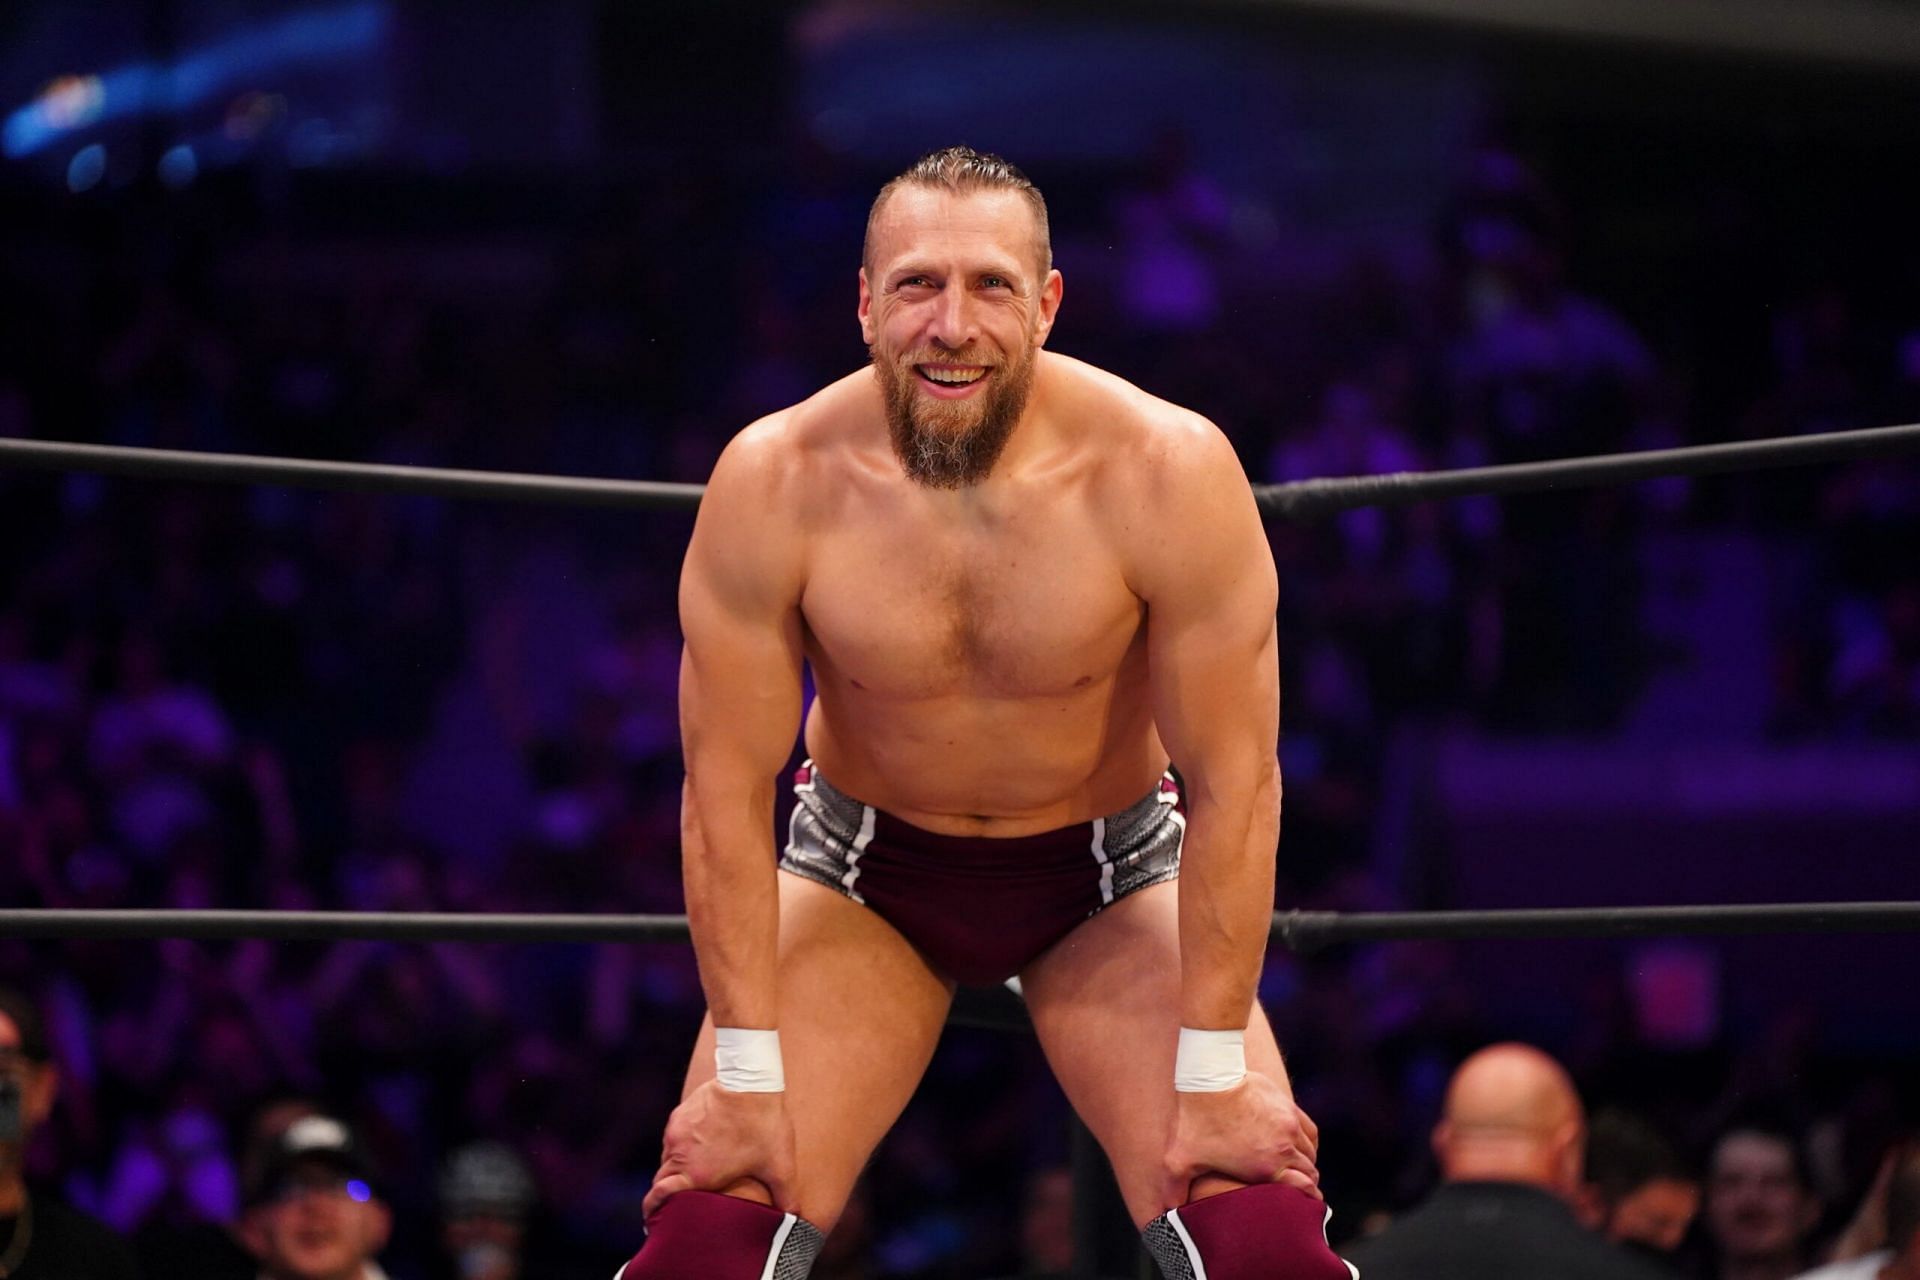 Bryan Danielson has been a part of Blackpool Combat Club